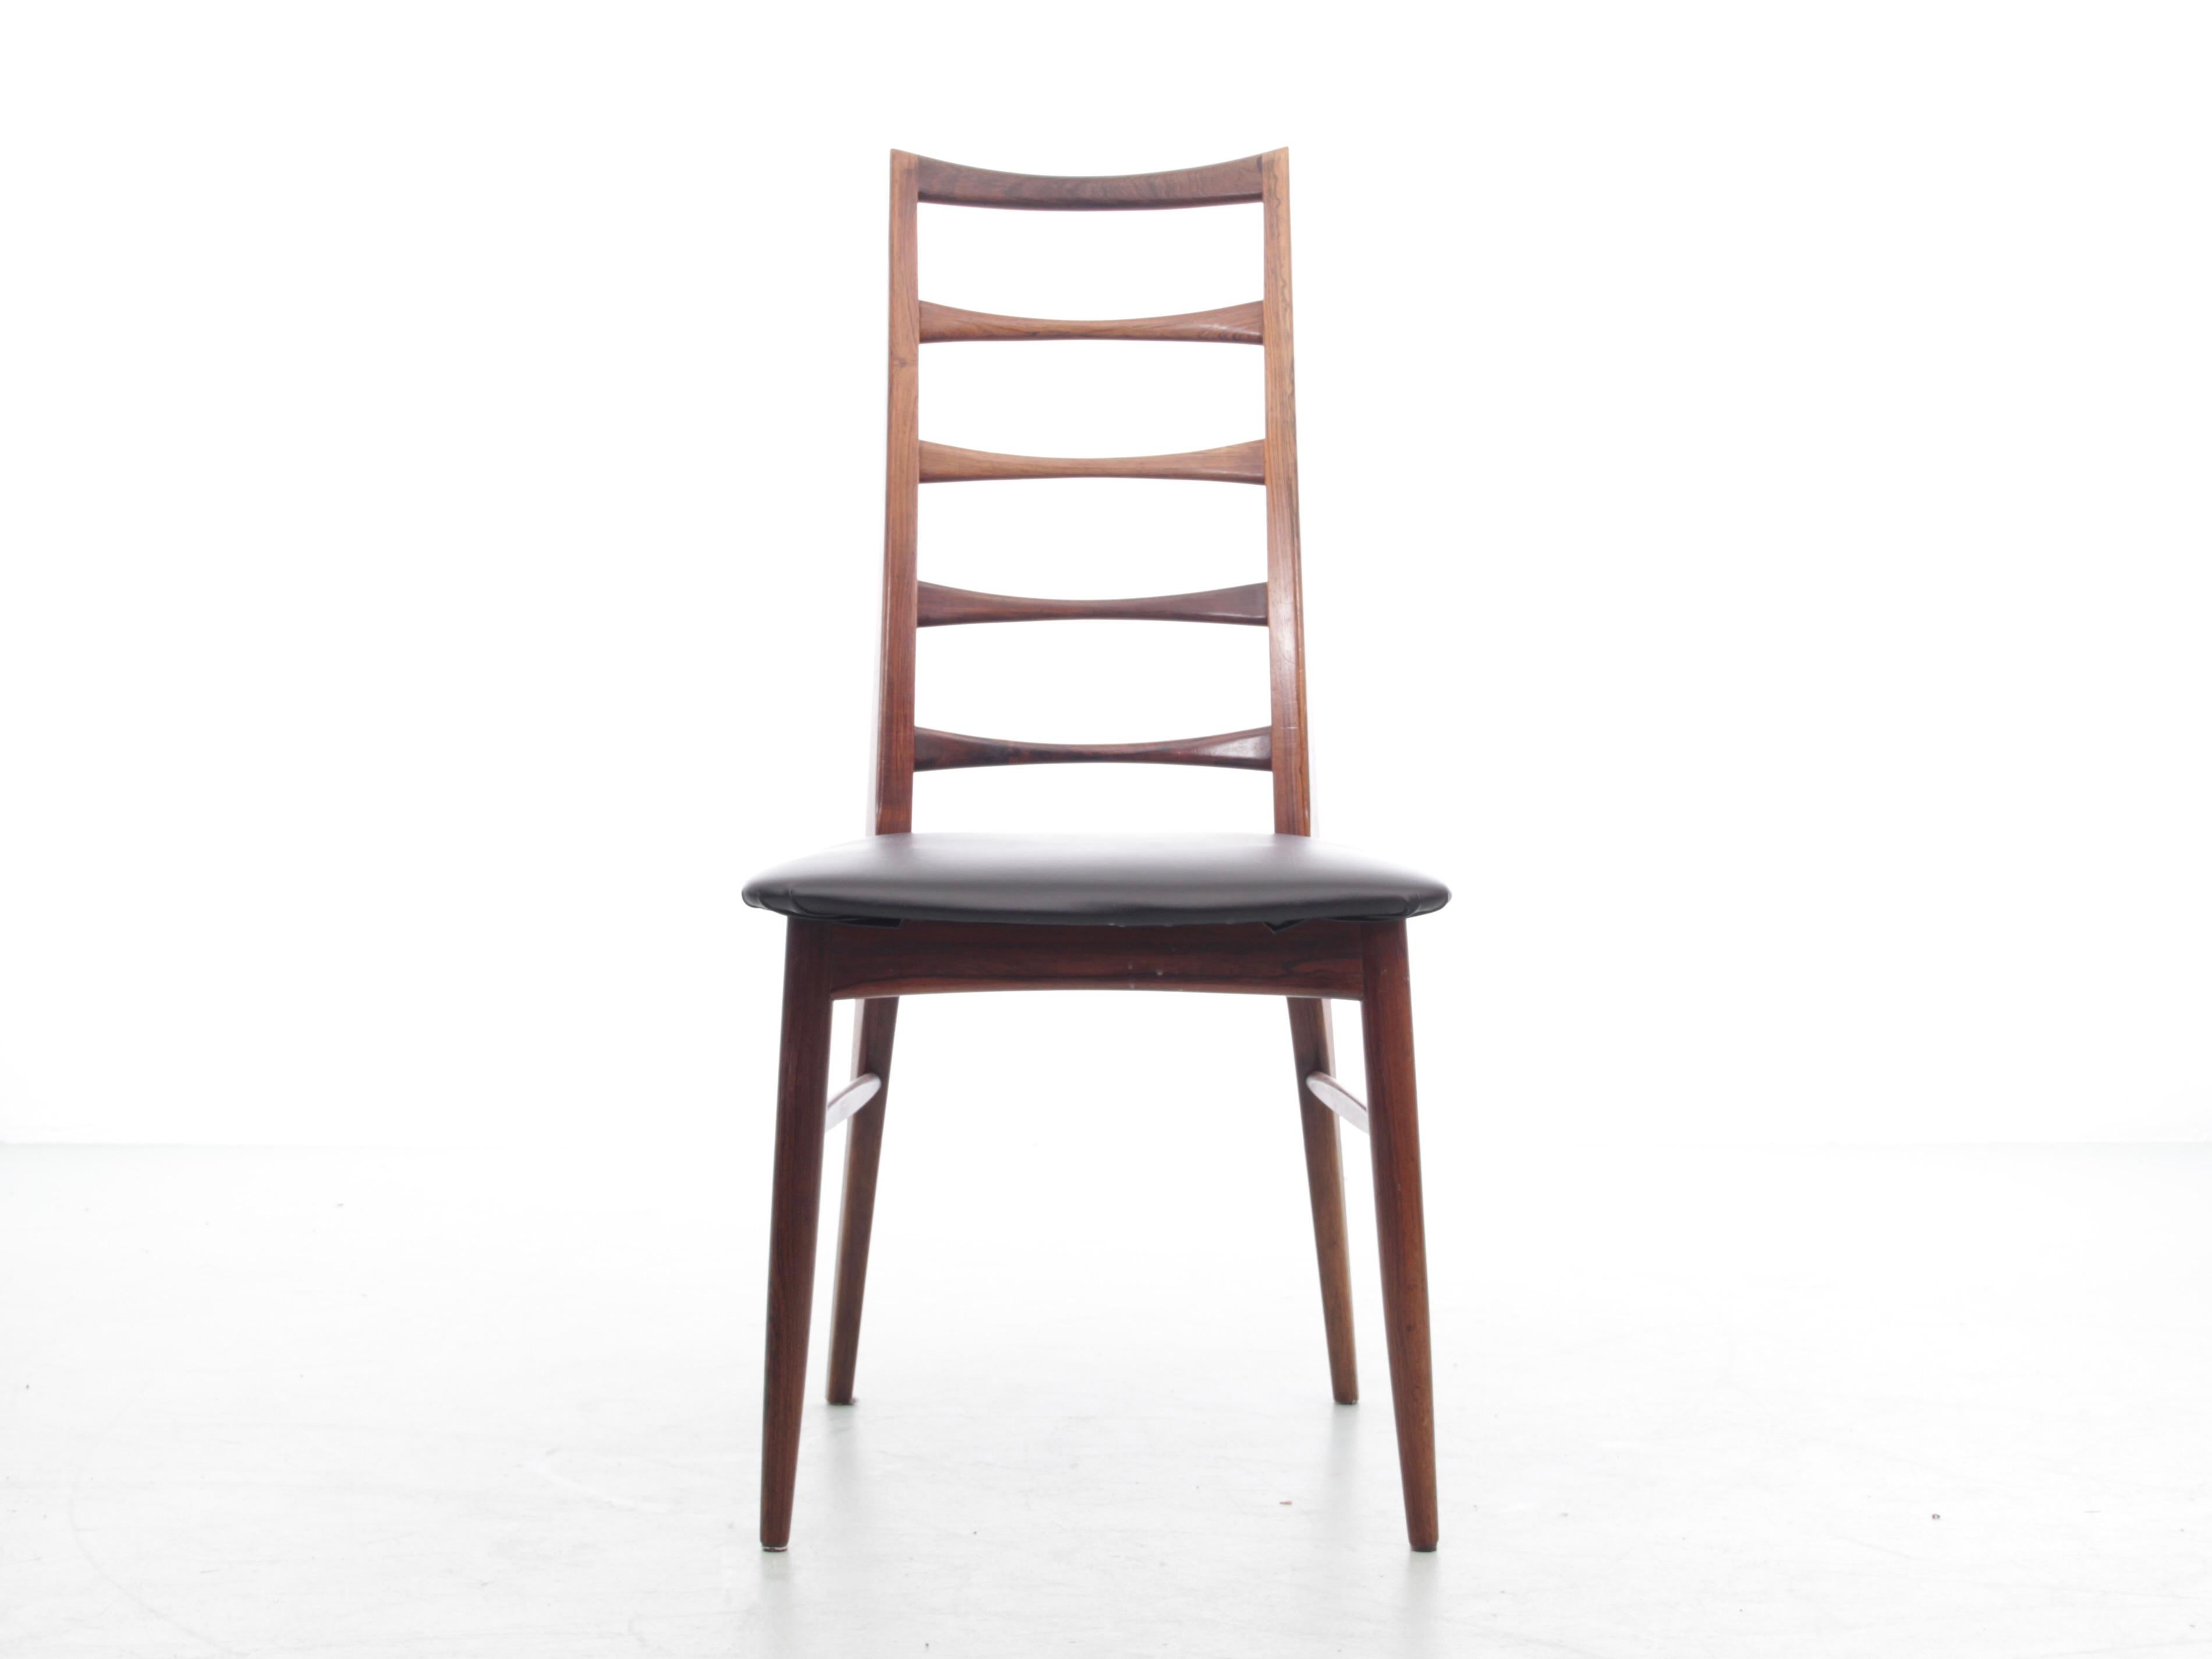 Mid-Century Modern scandinavian set of 4 teak chairs modele Lis by Niels Koefoed. Seats will be reupholtered with fabric or leather of your choice between Step Melange fabric from Gabriel or 